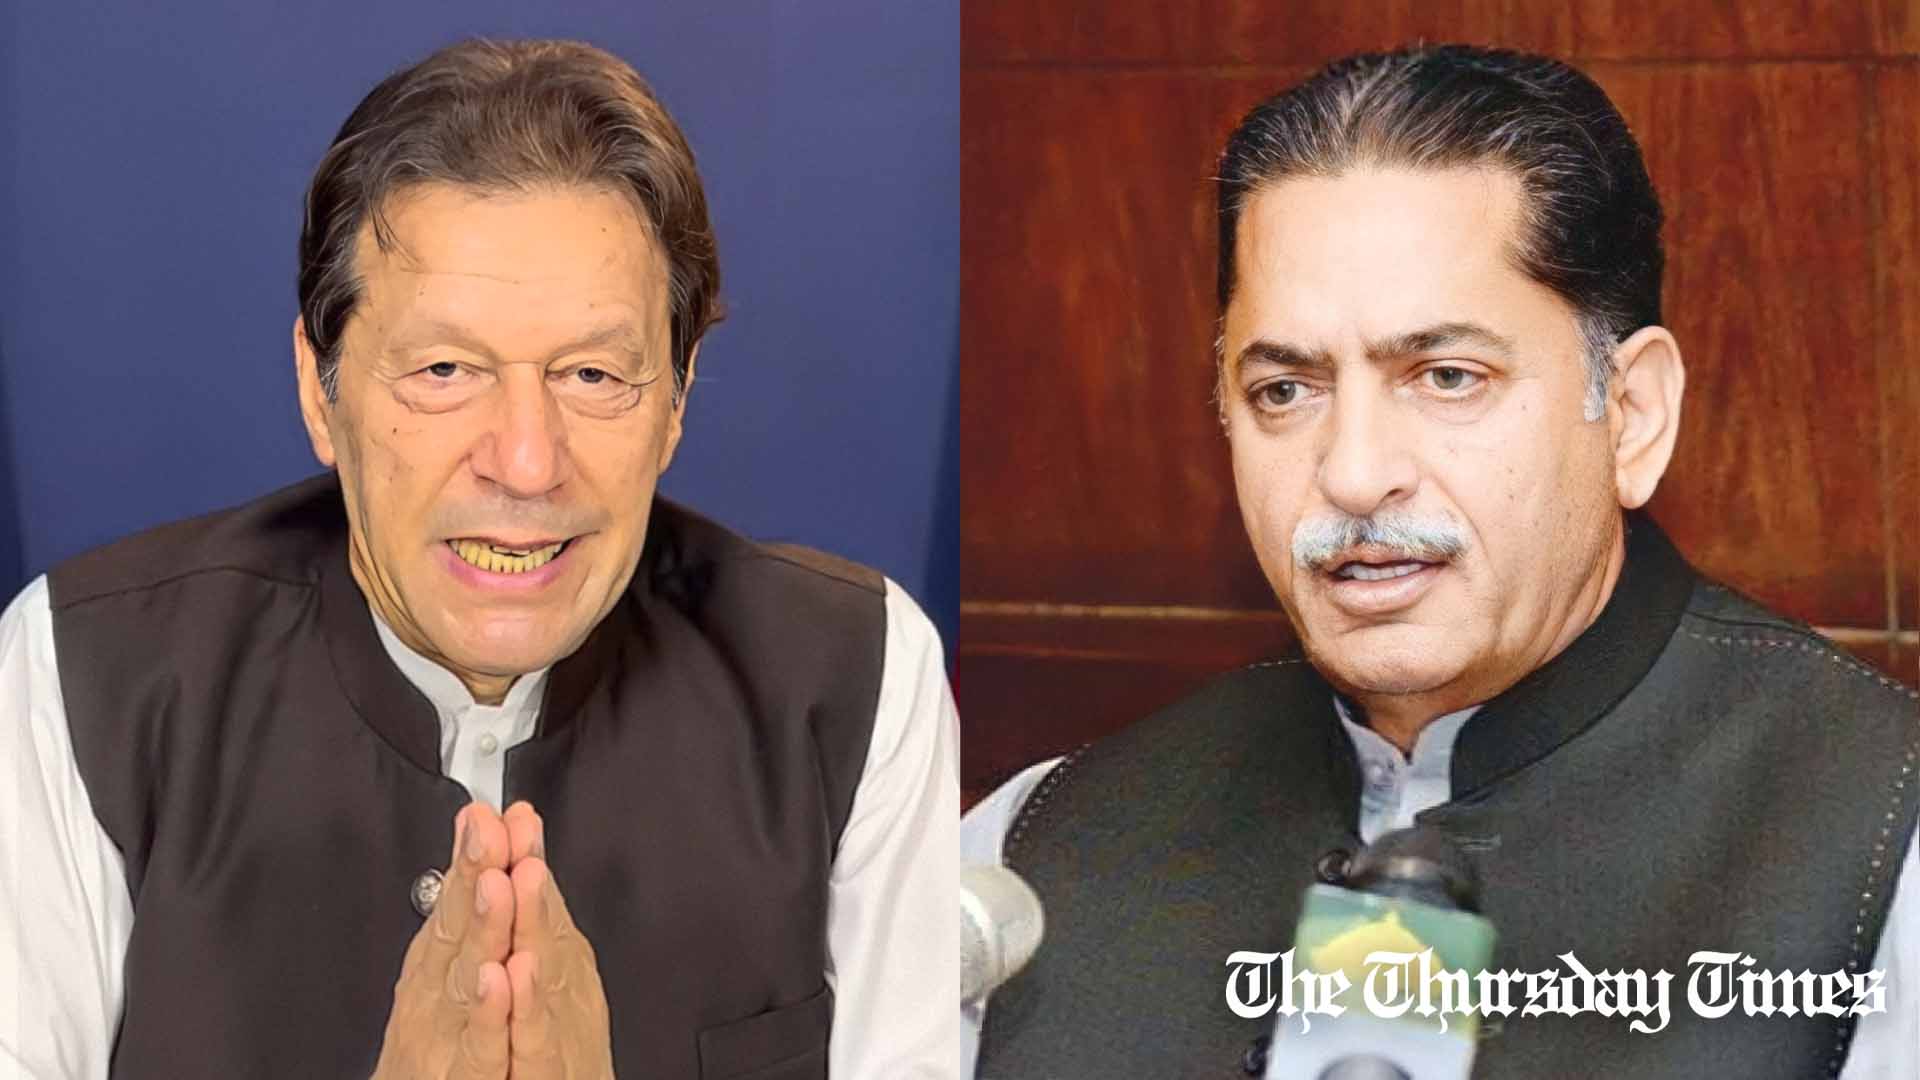 A combined file photo is shown of PTI chairman Imran Khan (L) alongside federal minister Mian Javed Latif (R). — FILE/THE THURSDAY TIMES